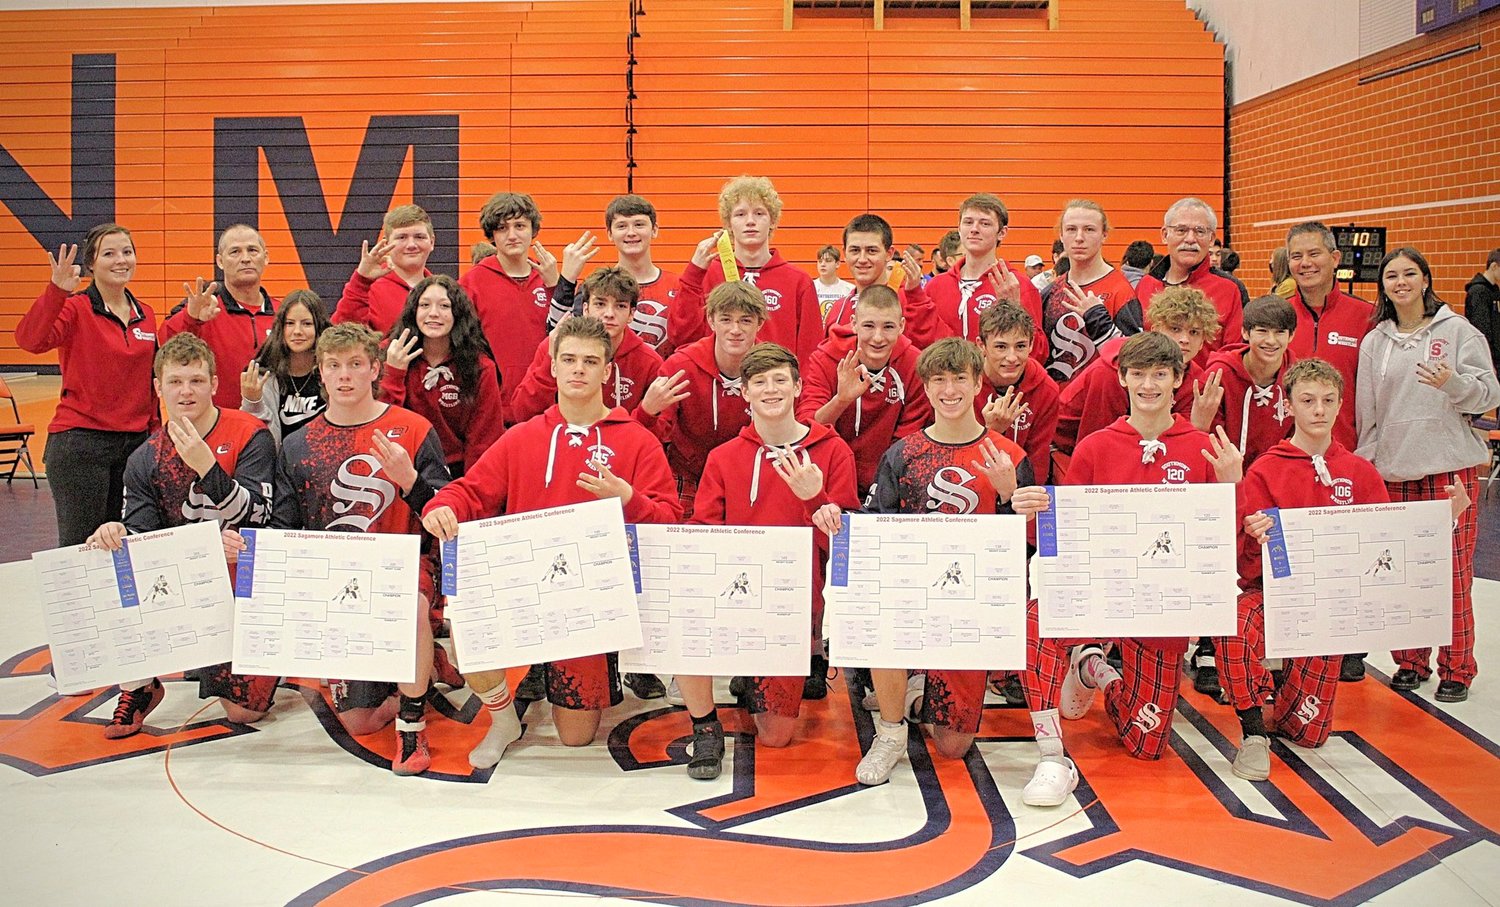 Southmont Wrestling captured their thrid straight Sagamore Conference Wrestling title Saturday. The Mounties had seven members of the team win their weight class as they pulled away to score 254.5 points.